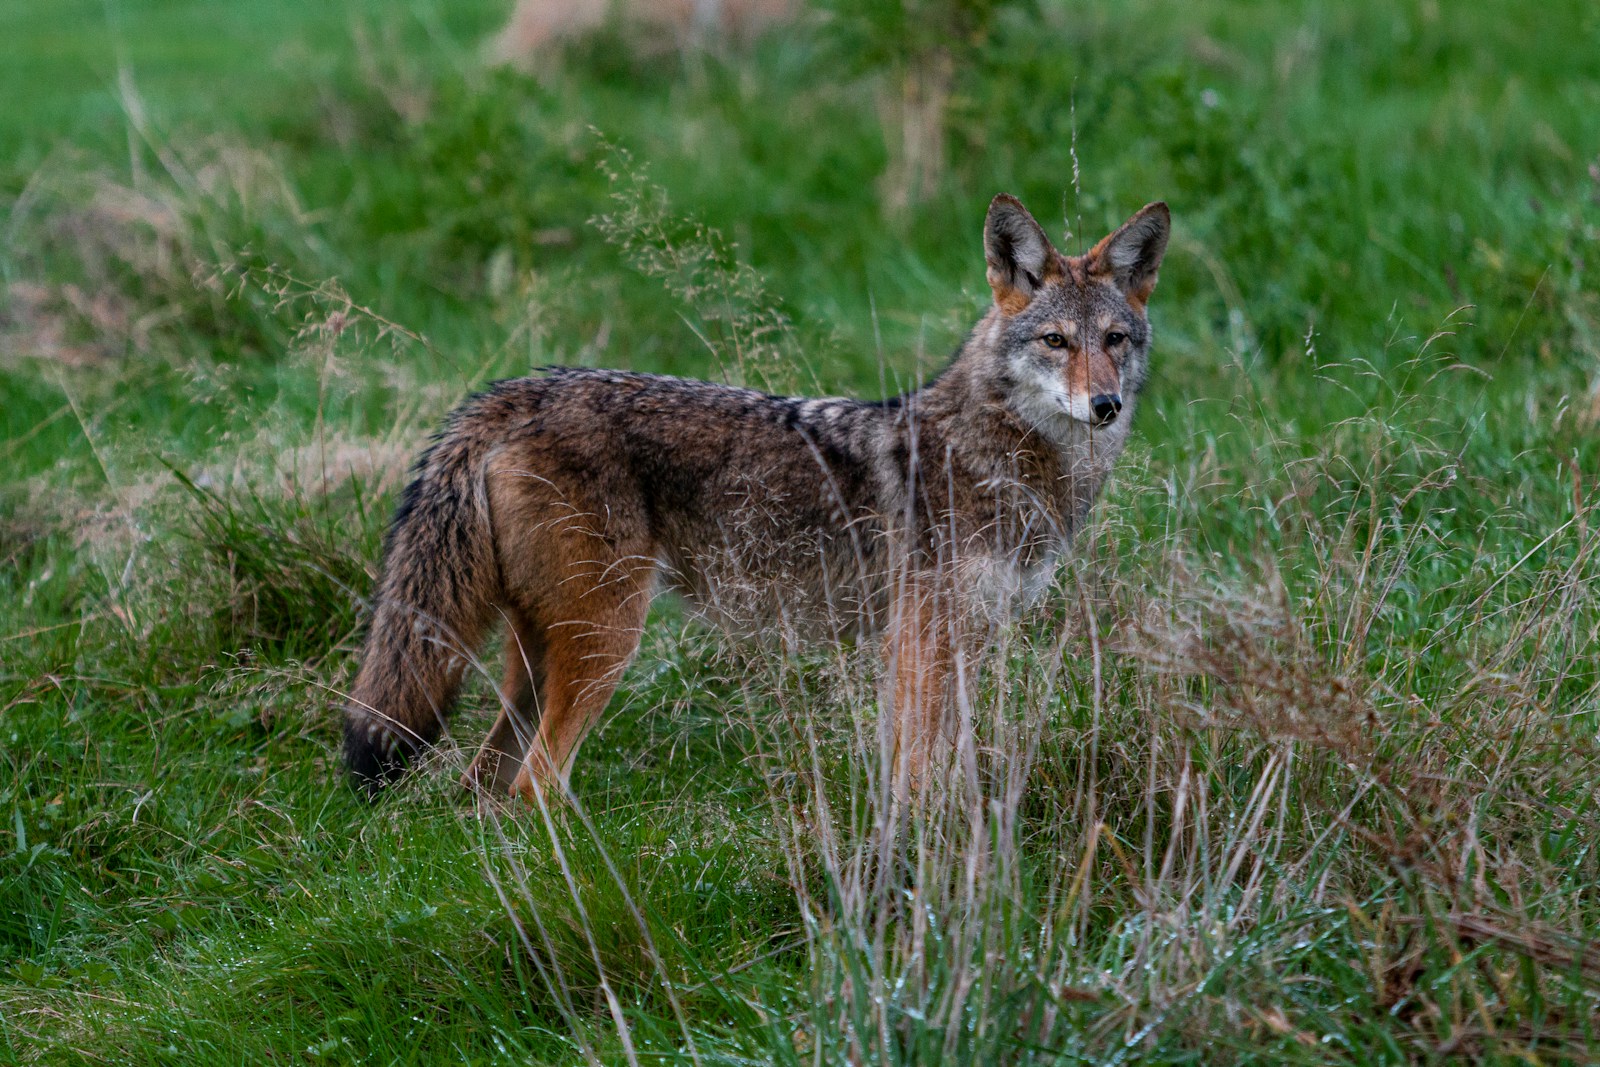 Coyotes standing on grass during day